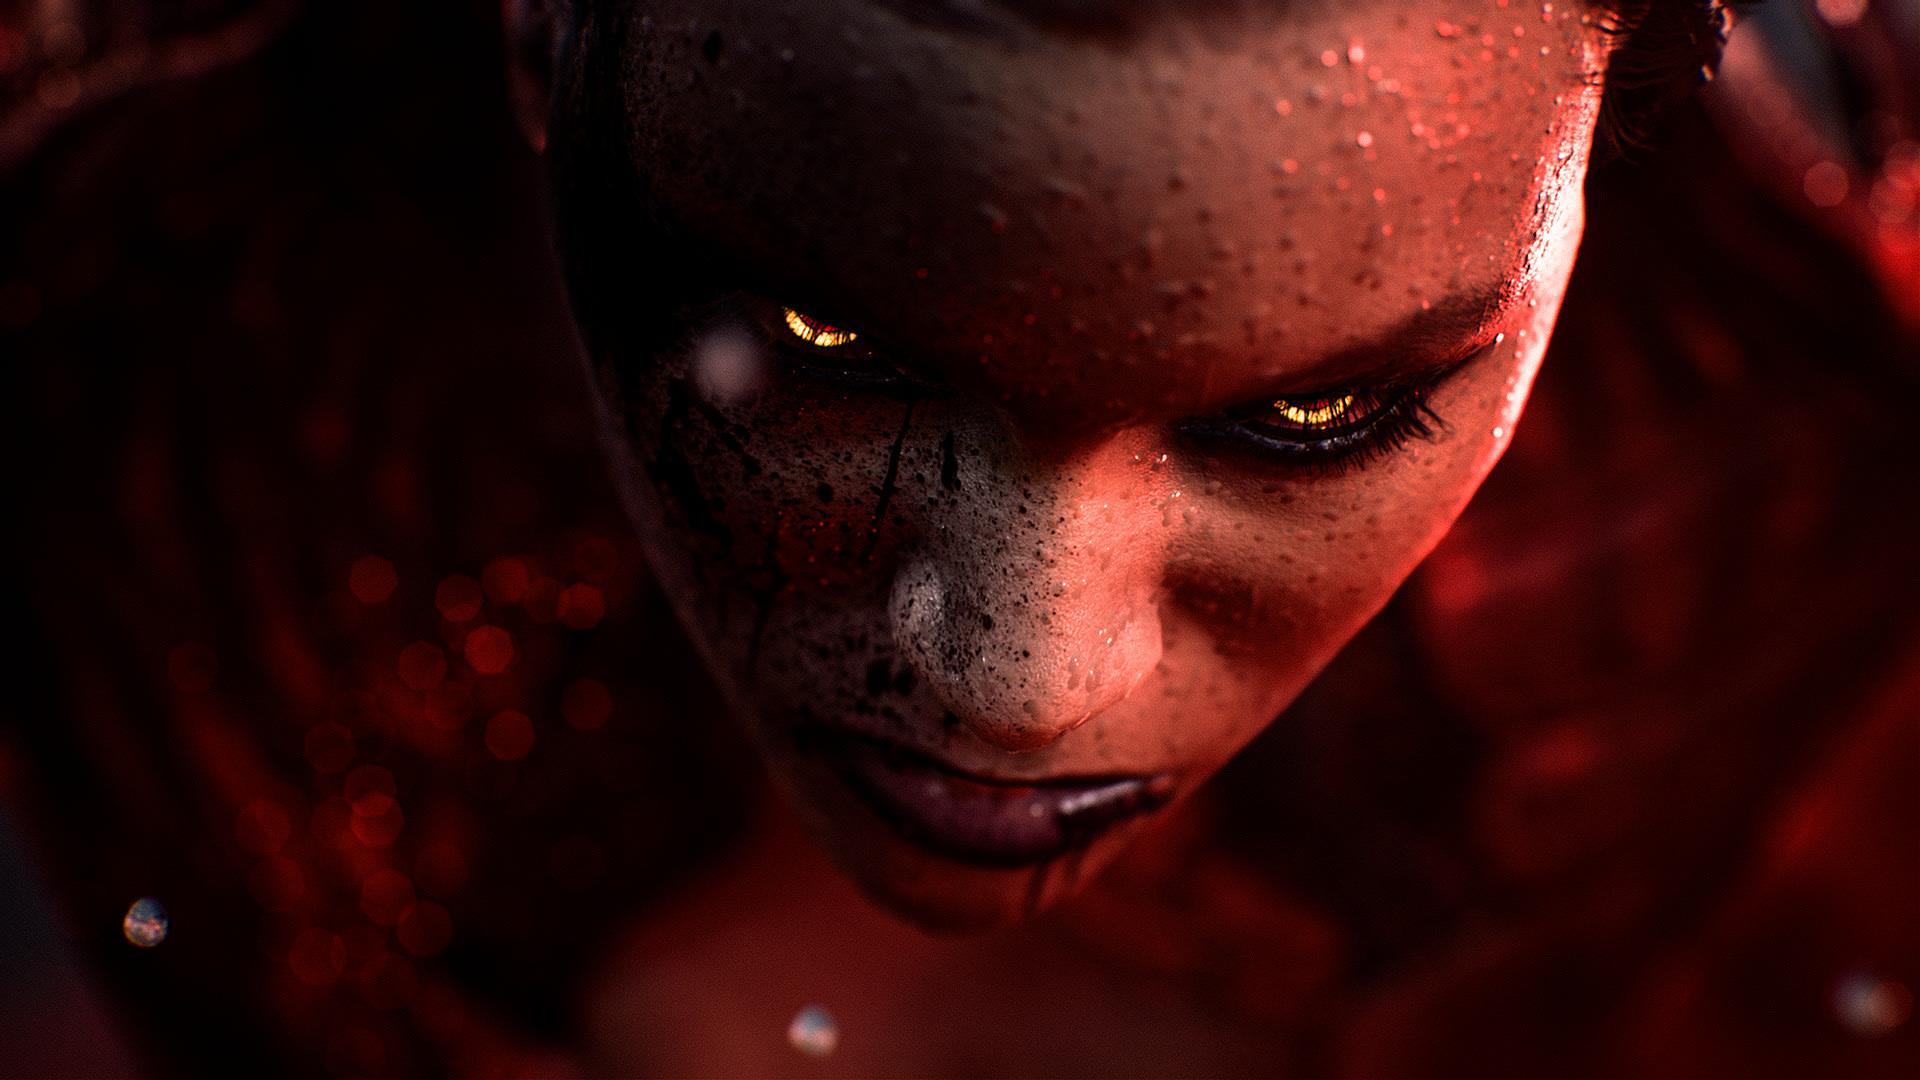 Video Game Vampire: The Masquerade - Bloodhunt HD Wallpaper | Background Image